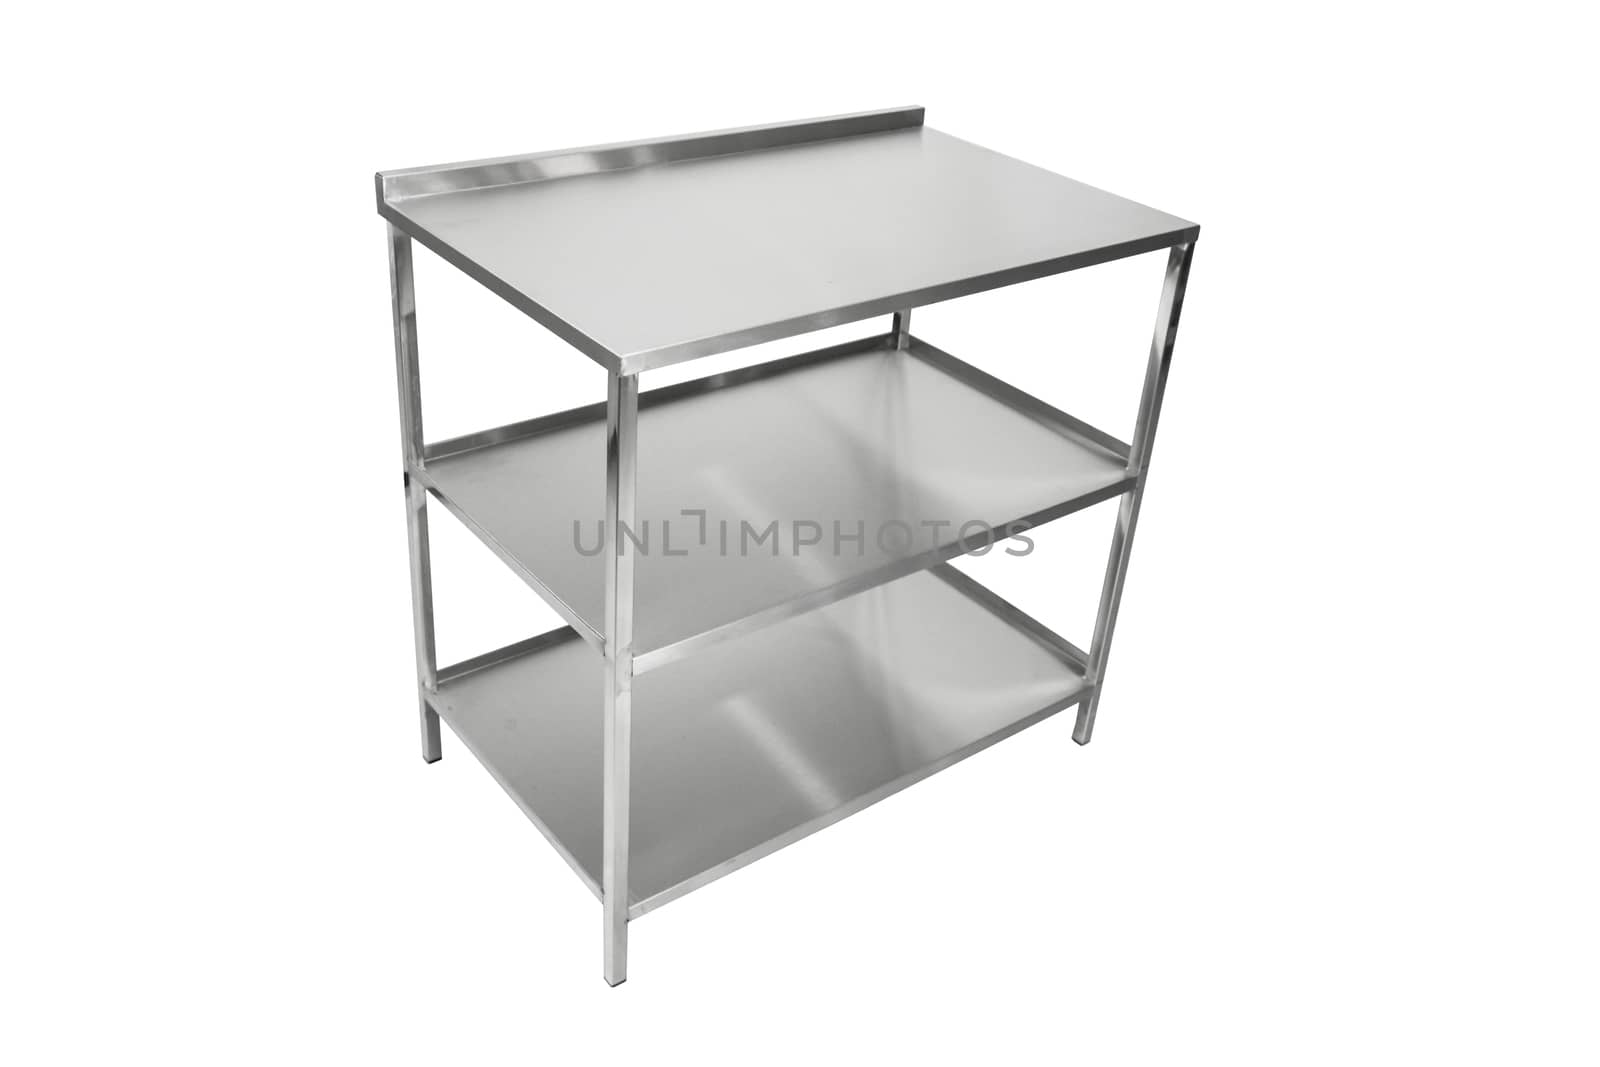 Blurred Table of stainless on isolated white background. by Buttus_casso